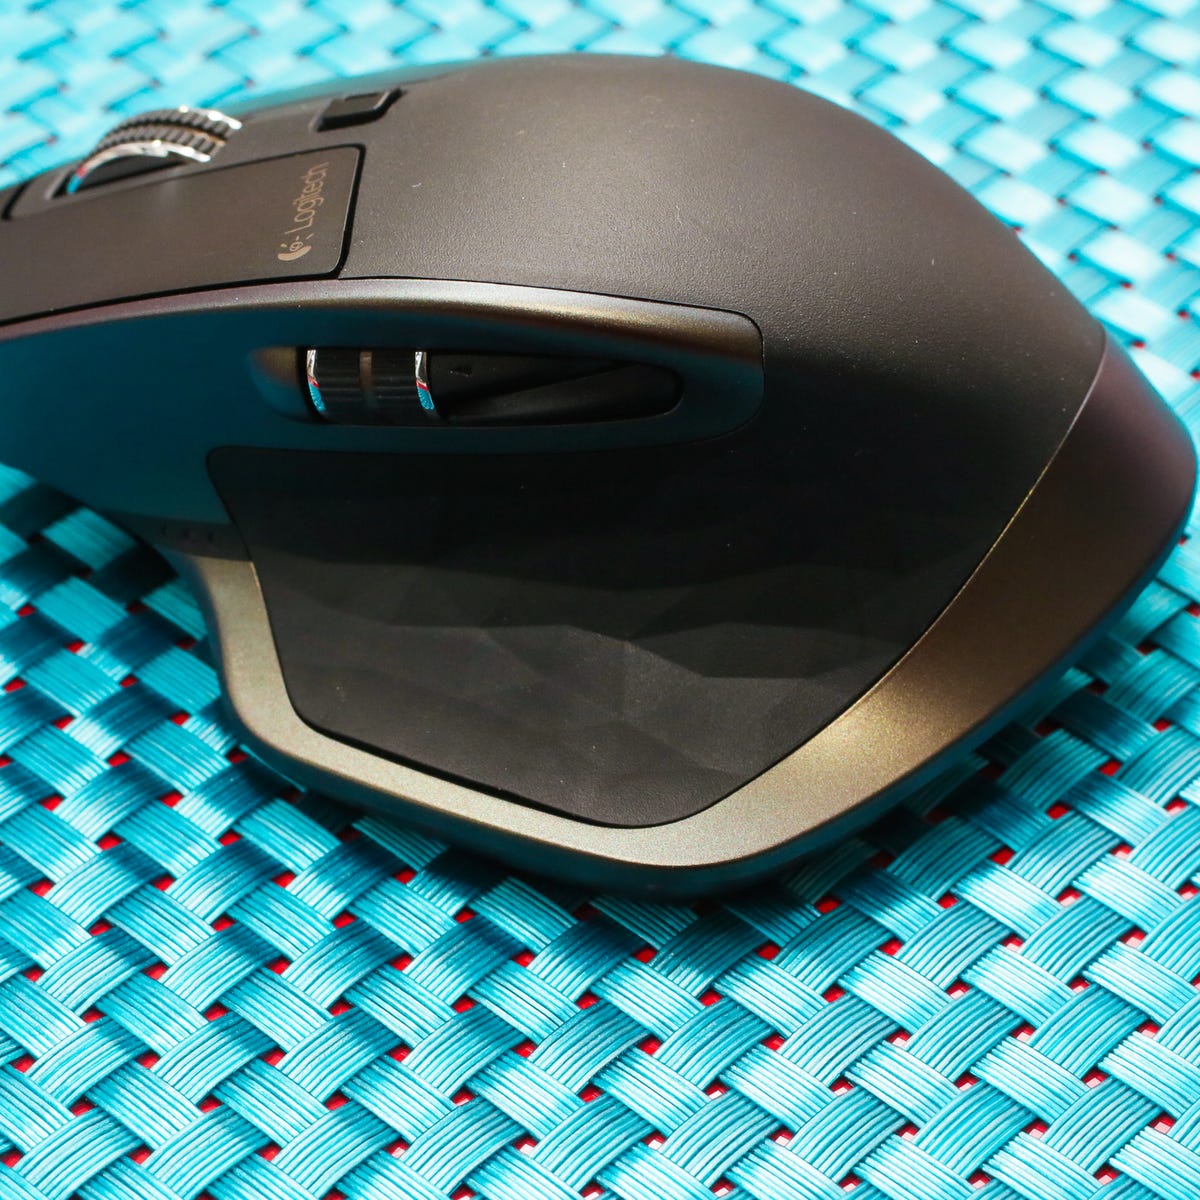 Logitech MX Master review: One smooth, feature-packed wireless mouse - CNET